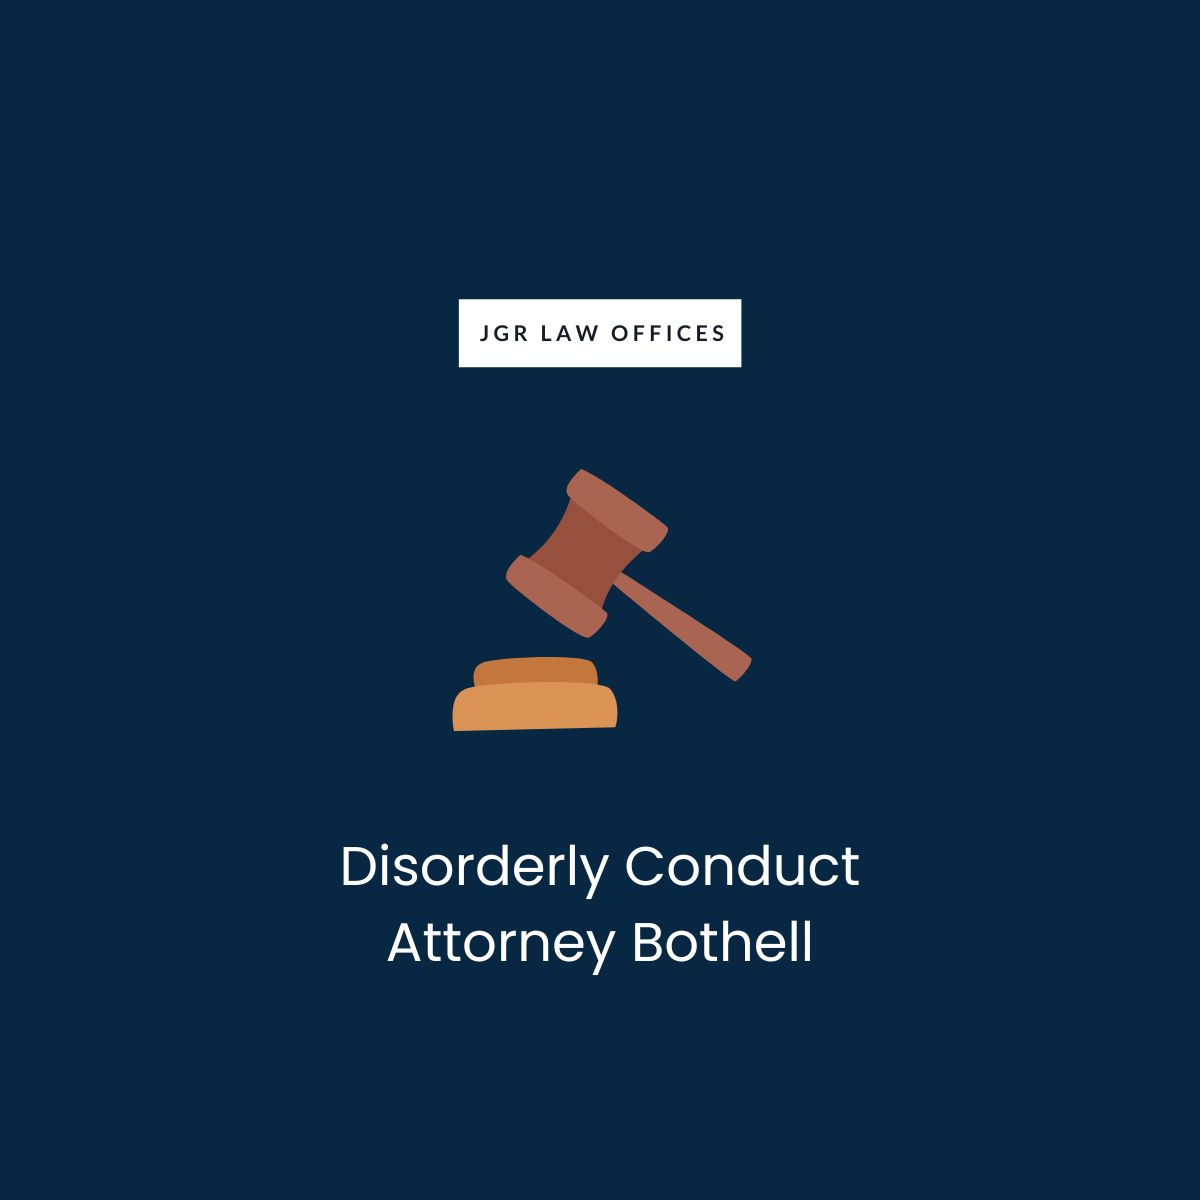 Disorderly Conduct Attorney Bothell